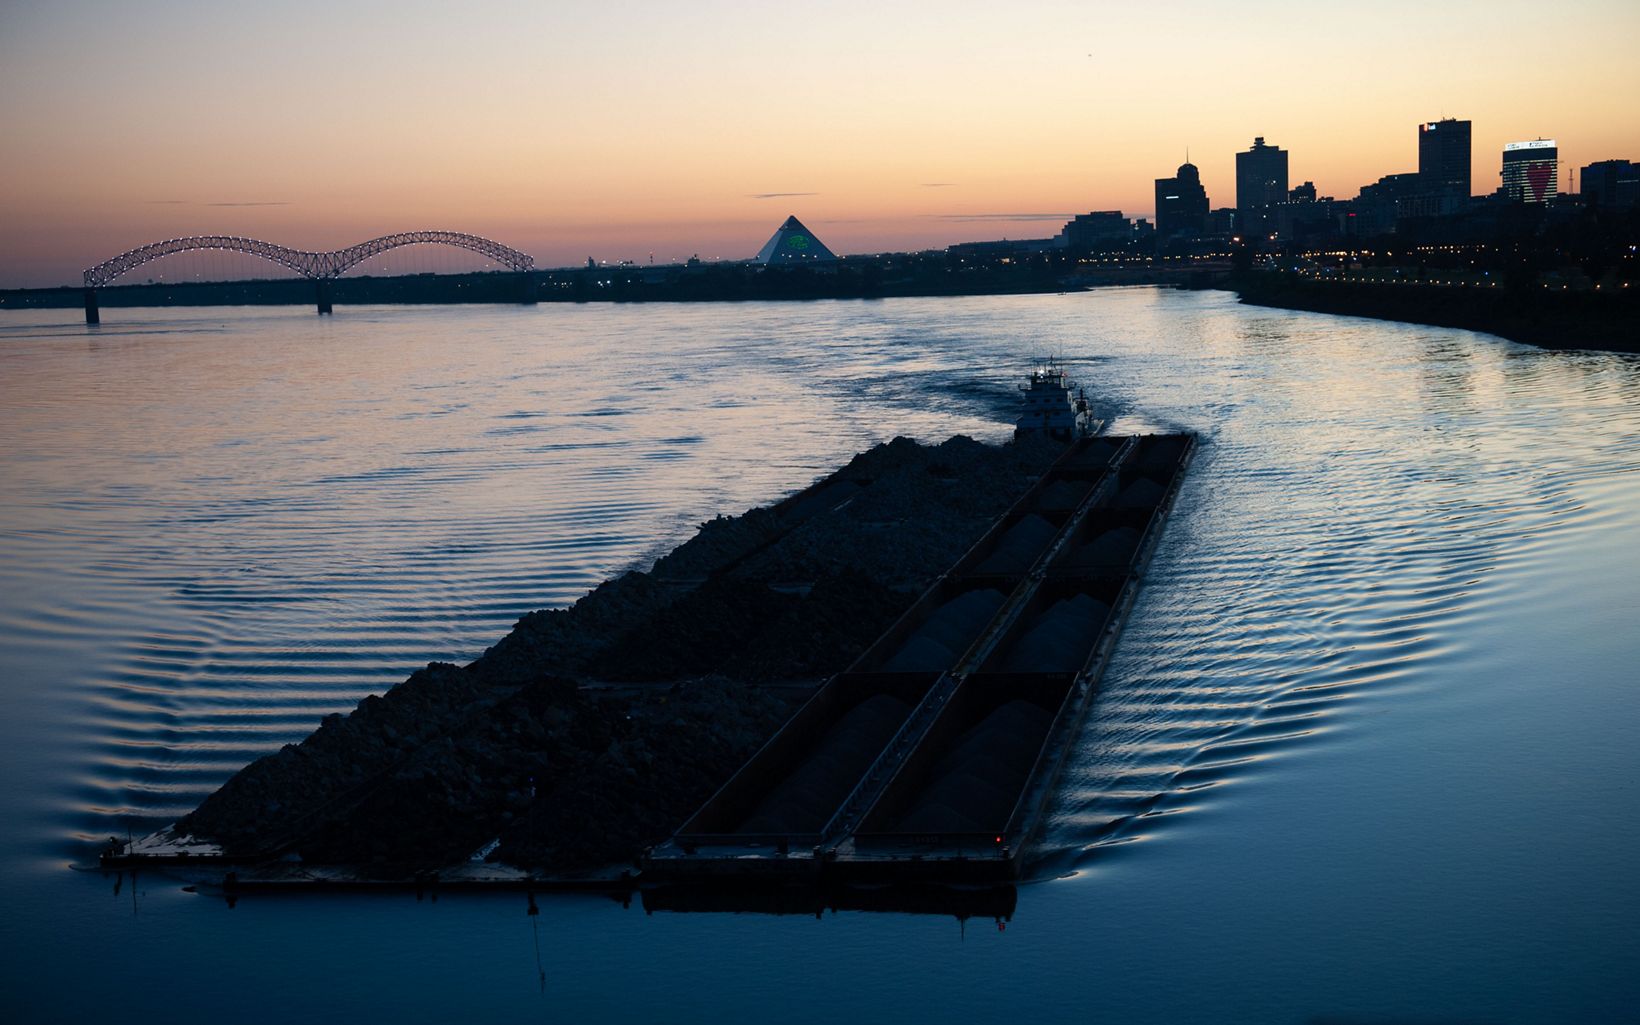 The silhouette of a barge moving down the river, rippling the water around it at sunset. The skyline of the city of Memphis is visible in the distance.